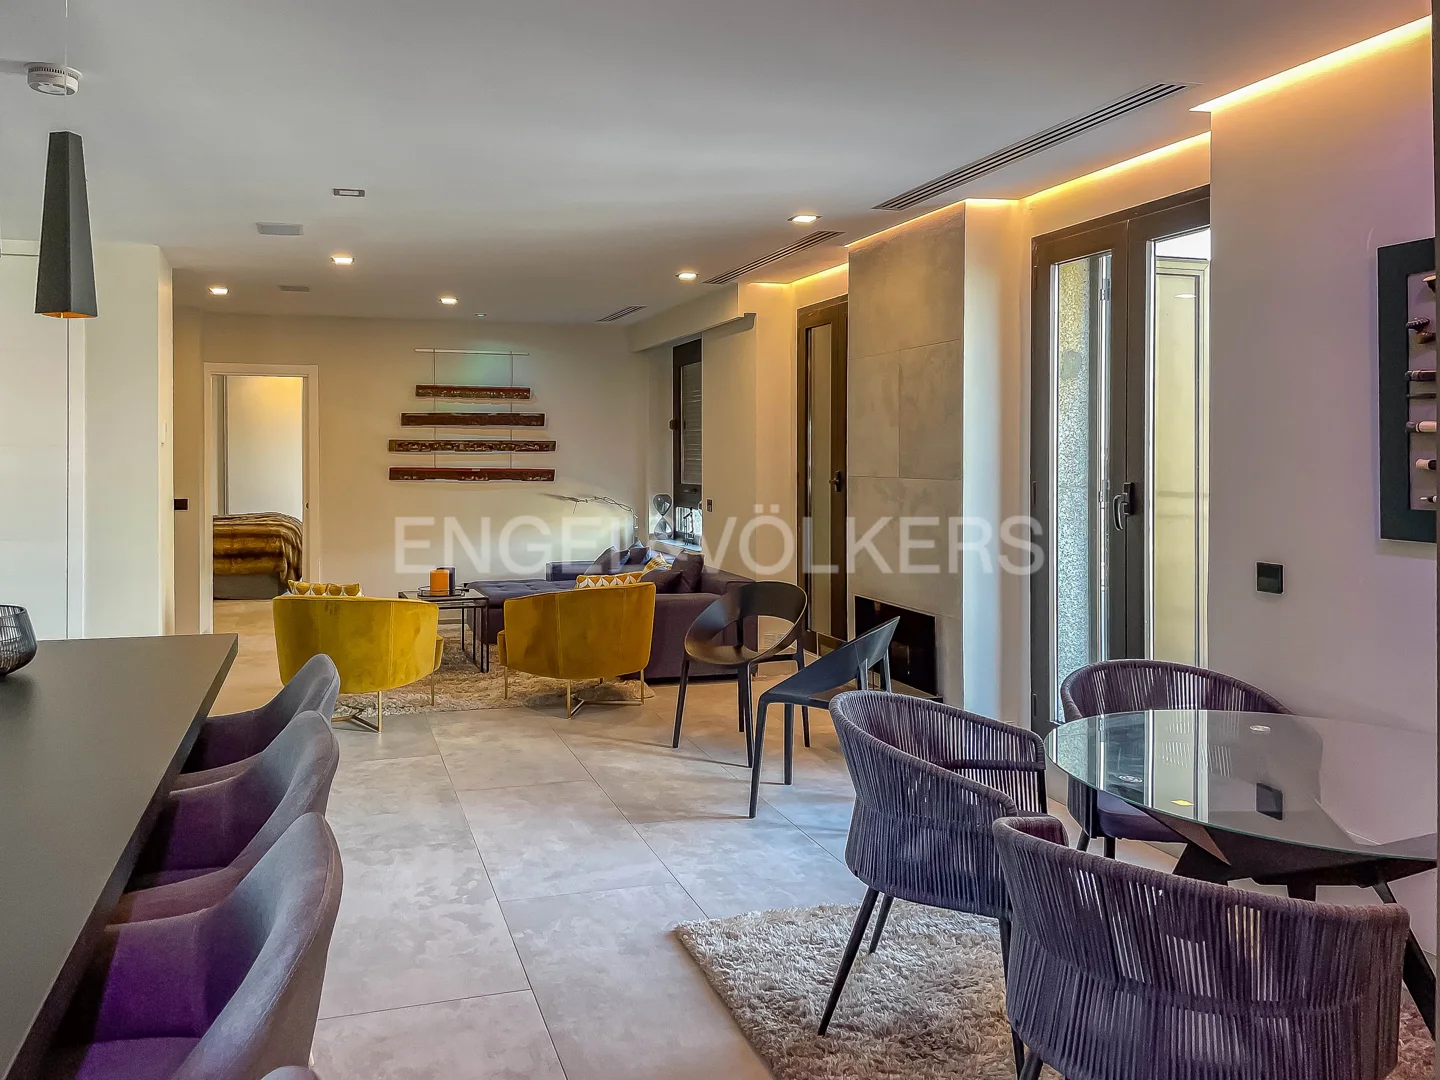 Modern furnished penthouse with terrace offering spectacular views over Paseo de la Castellana